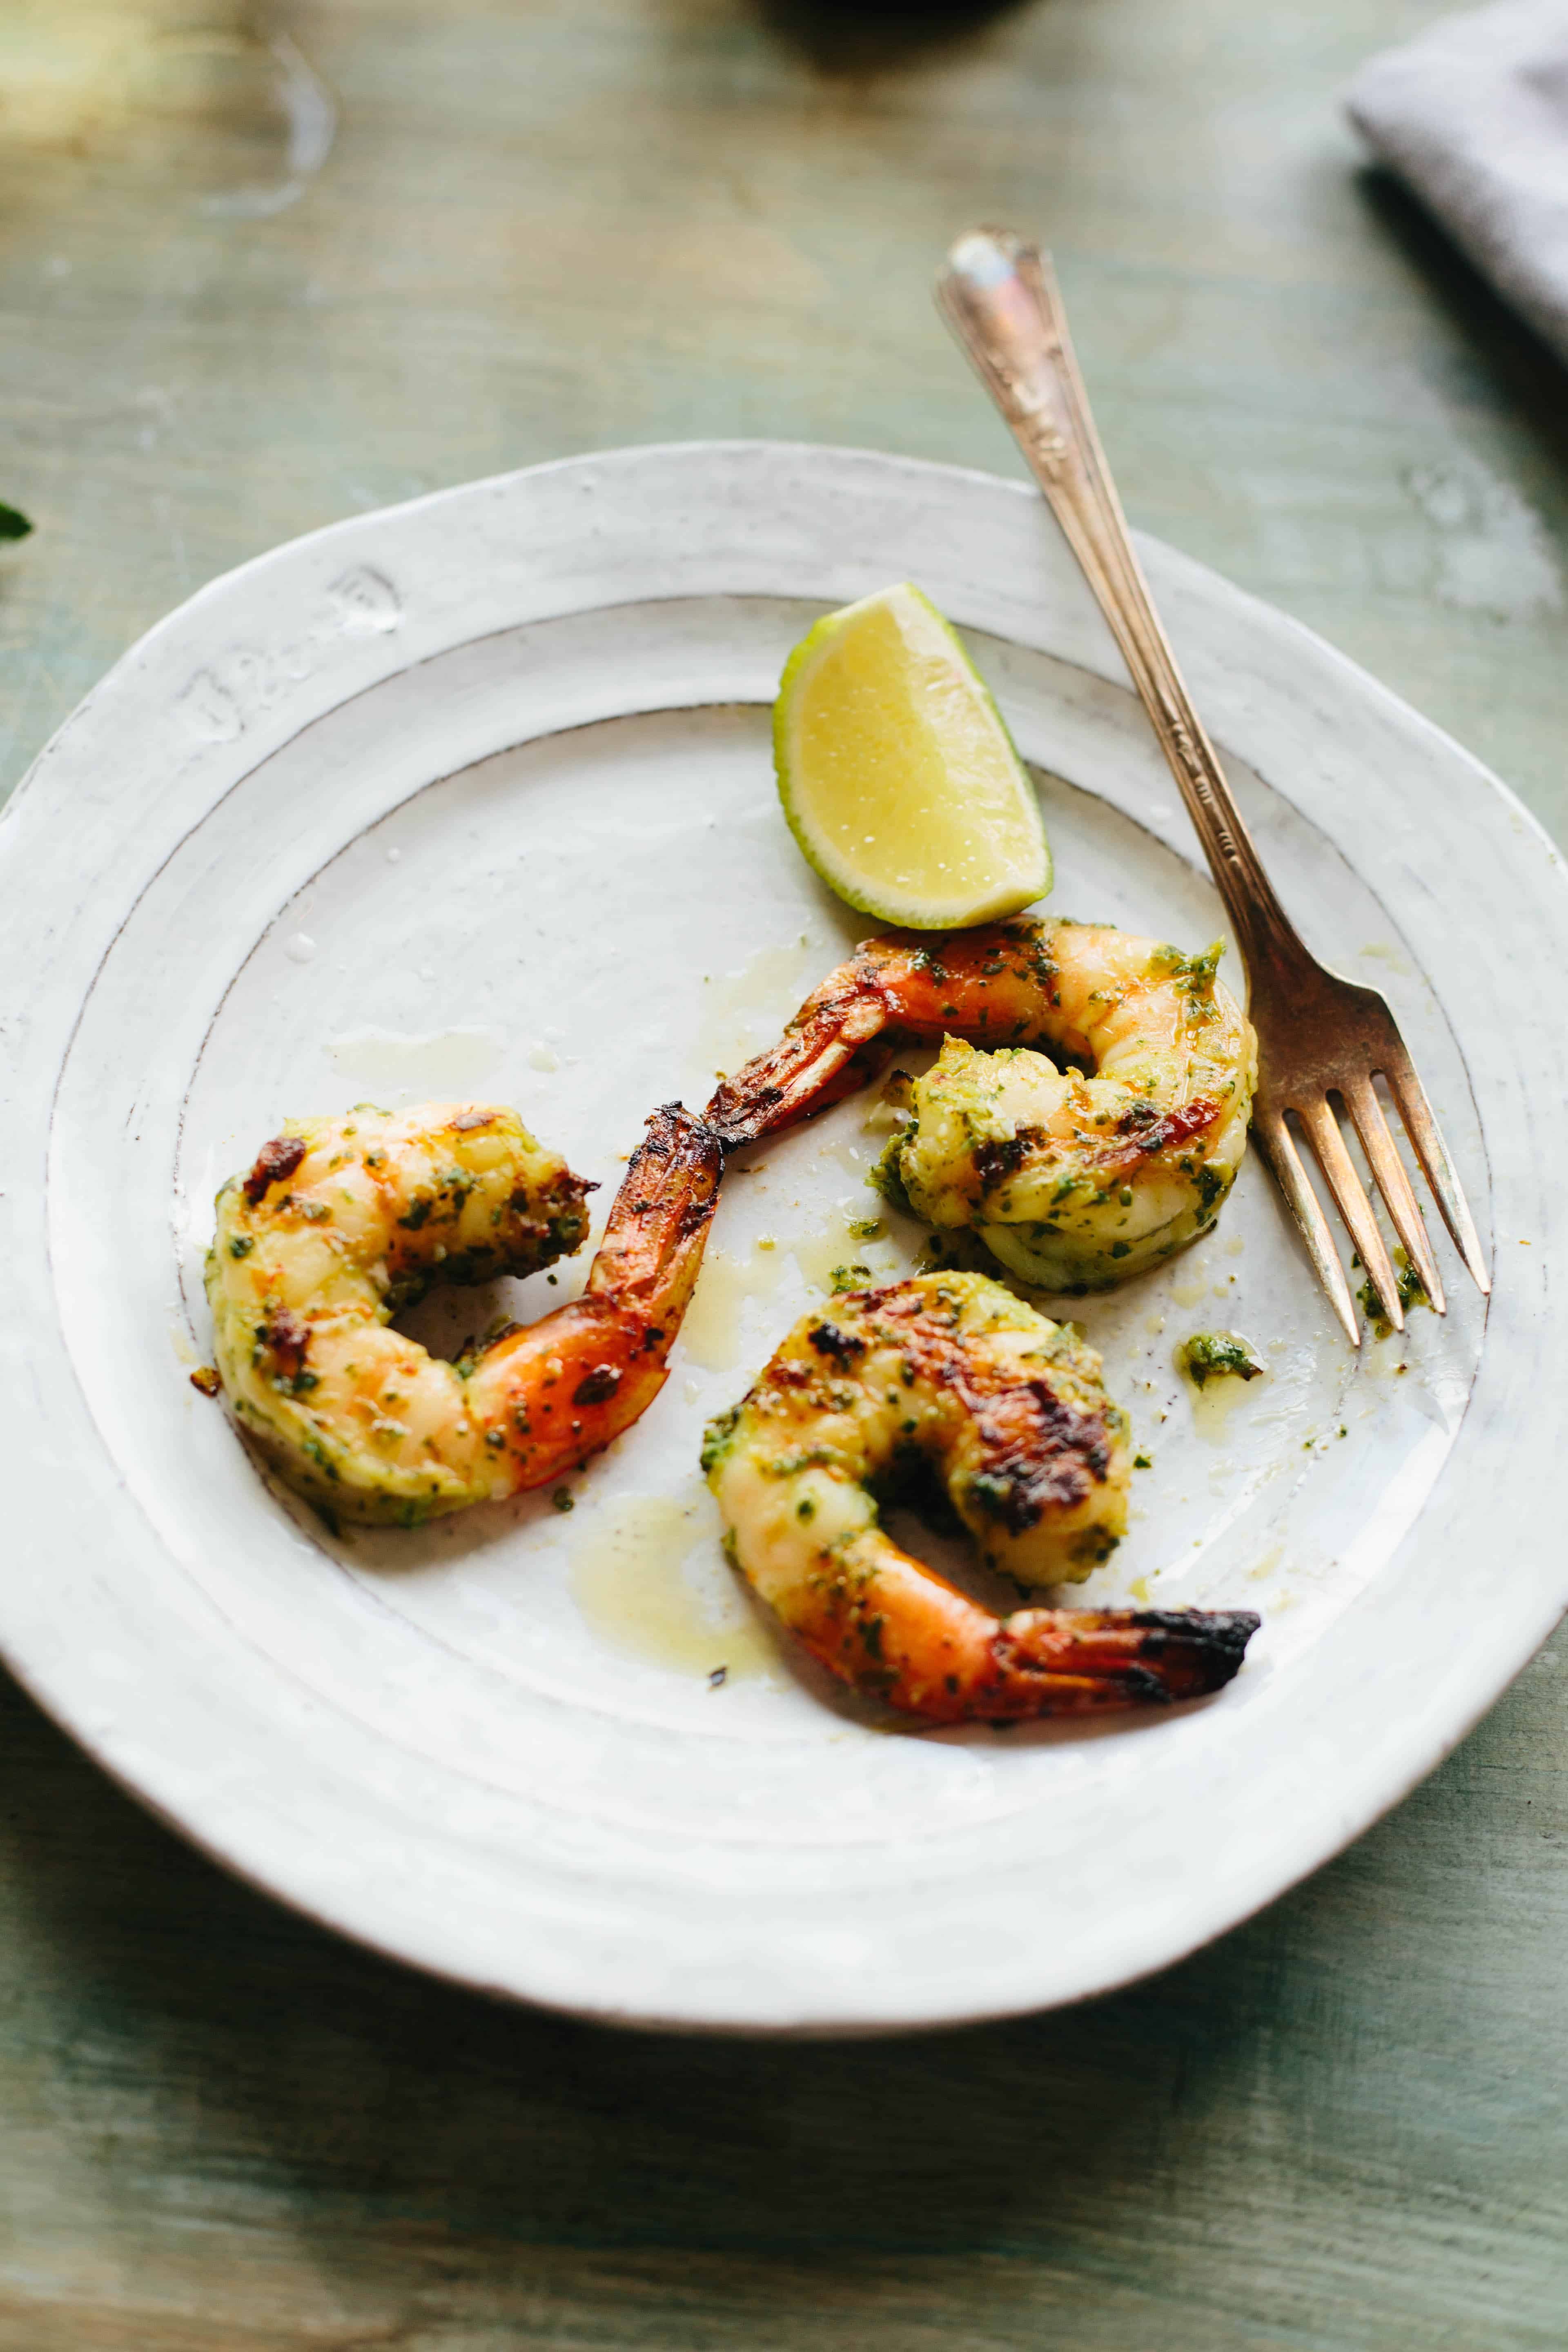 Citrus Herb Grilled Shrimp | This quick and easy recipe for Citrus Herb Grilled Shrimp is an insanely delicious flavor-packed summer meal. | ColeyCooks.com